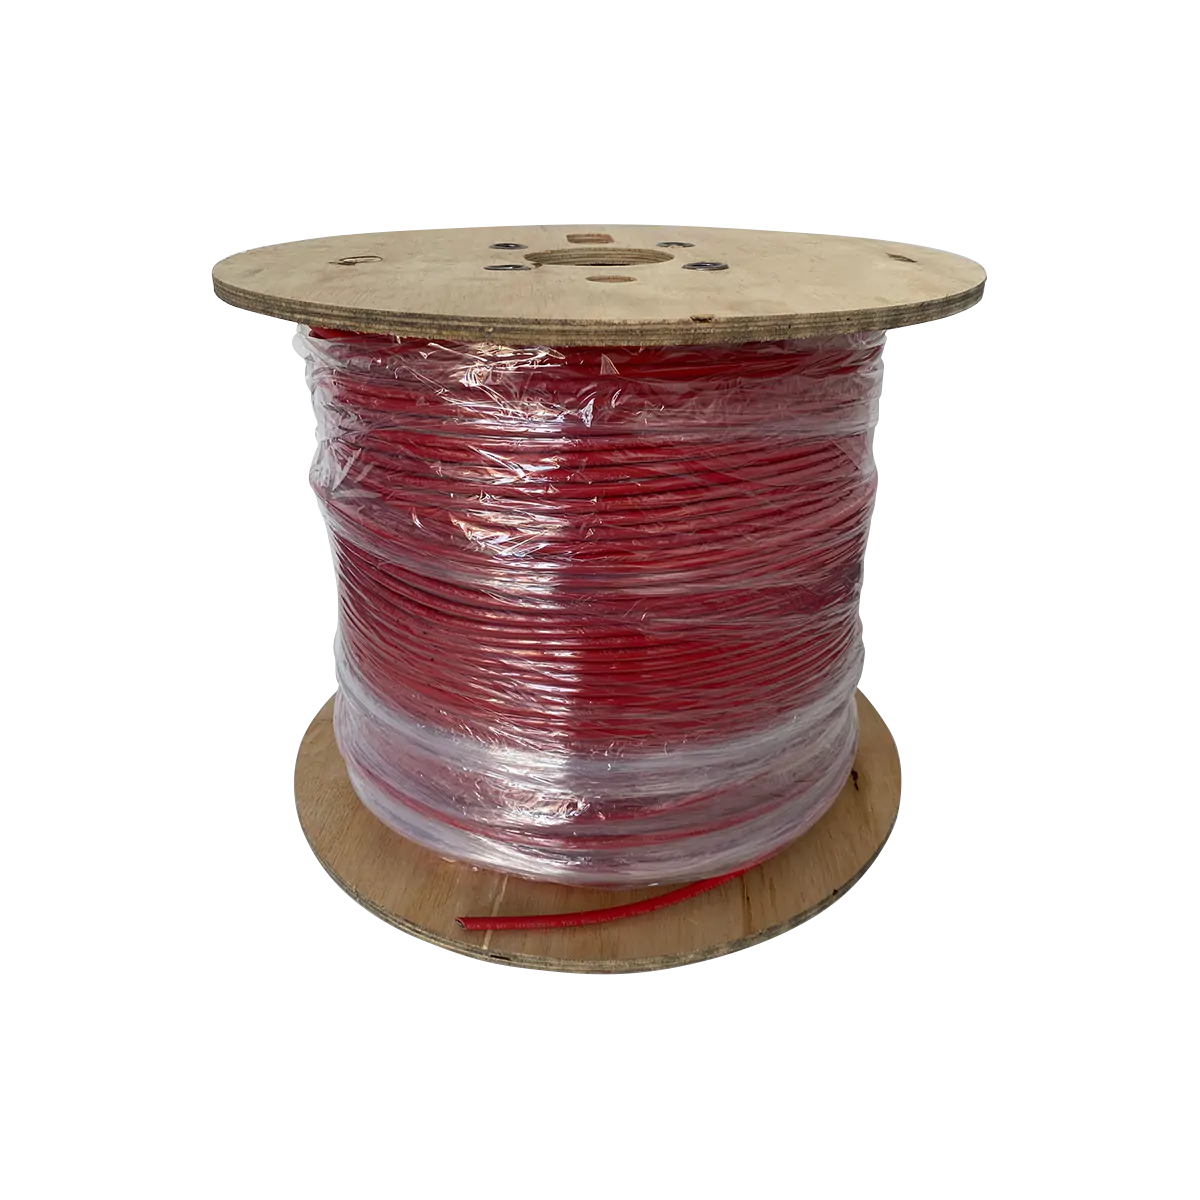 500 meter long Athilex cable